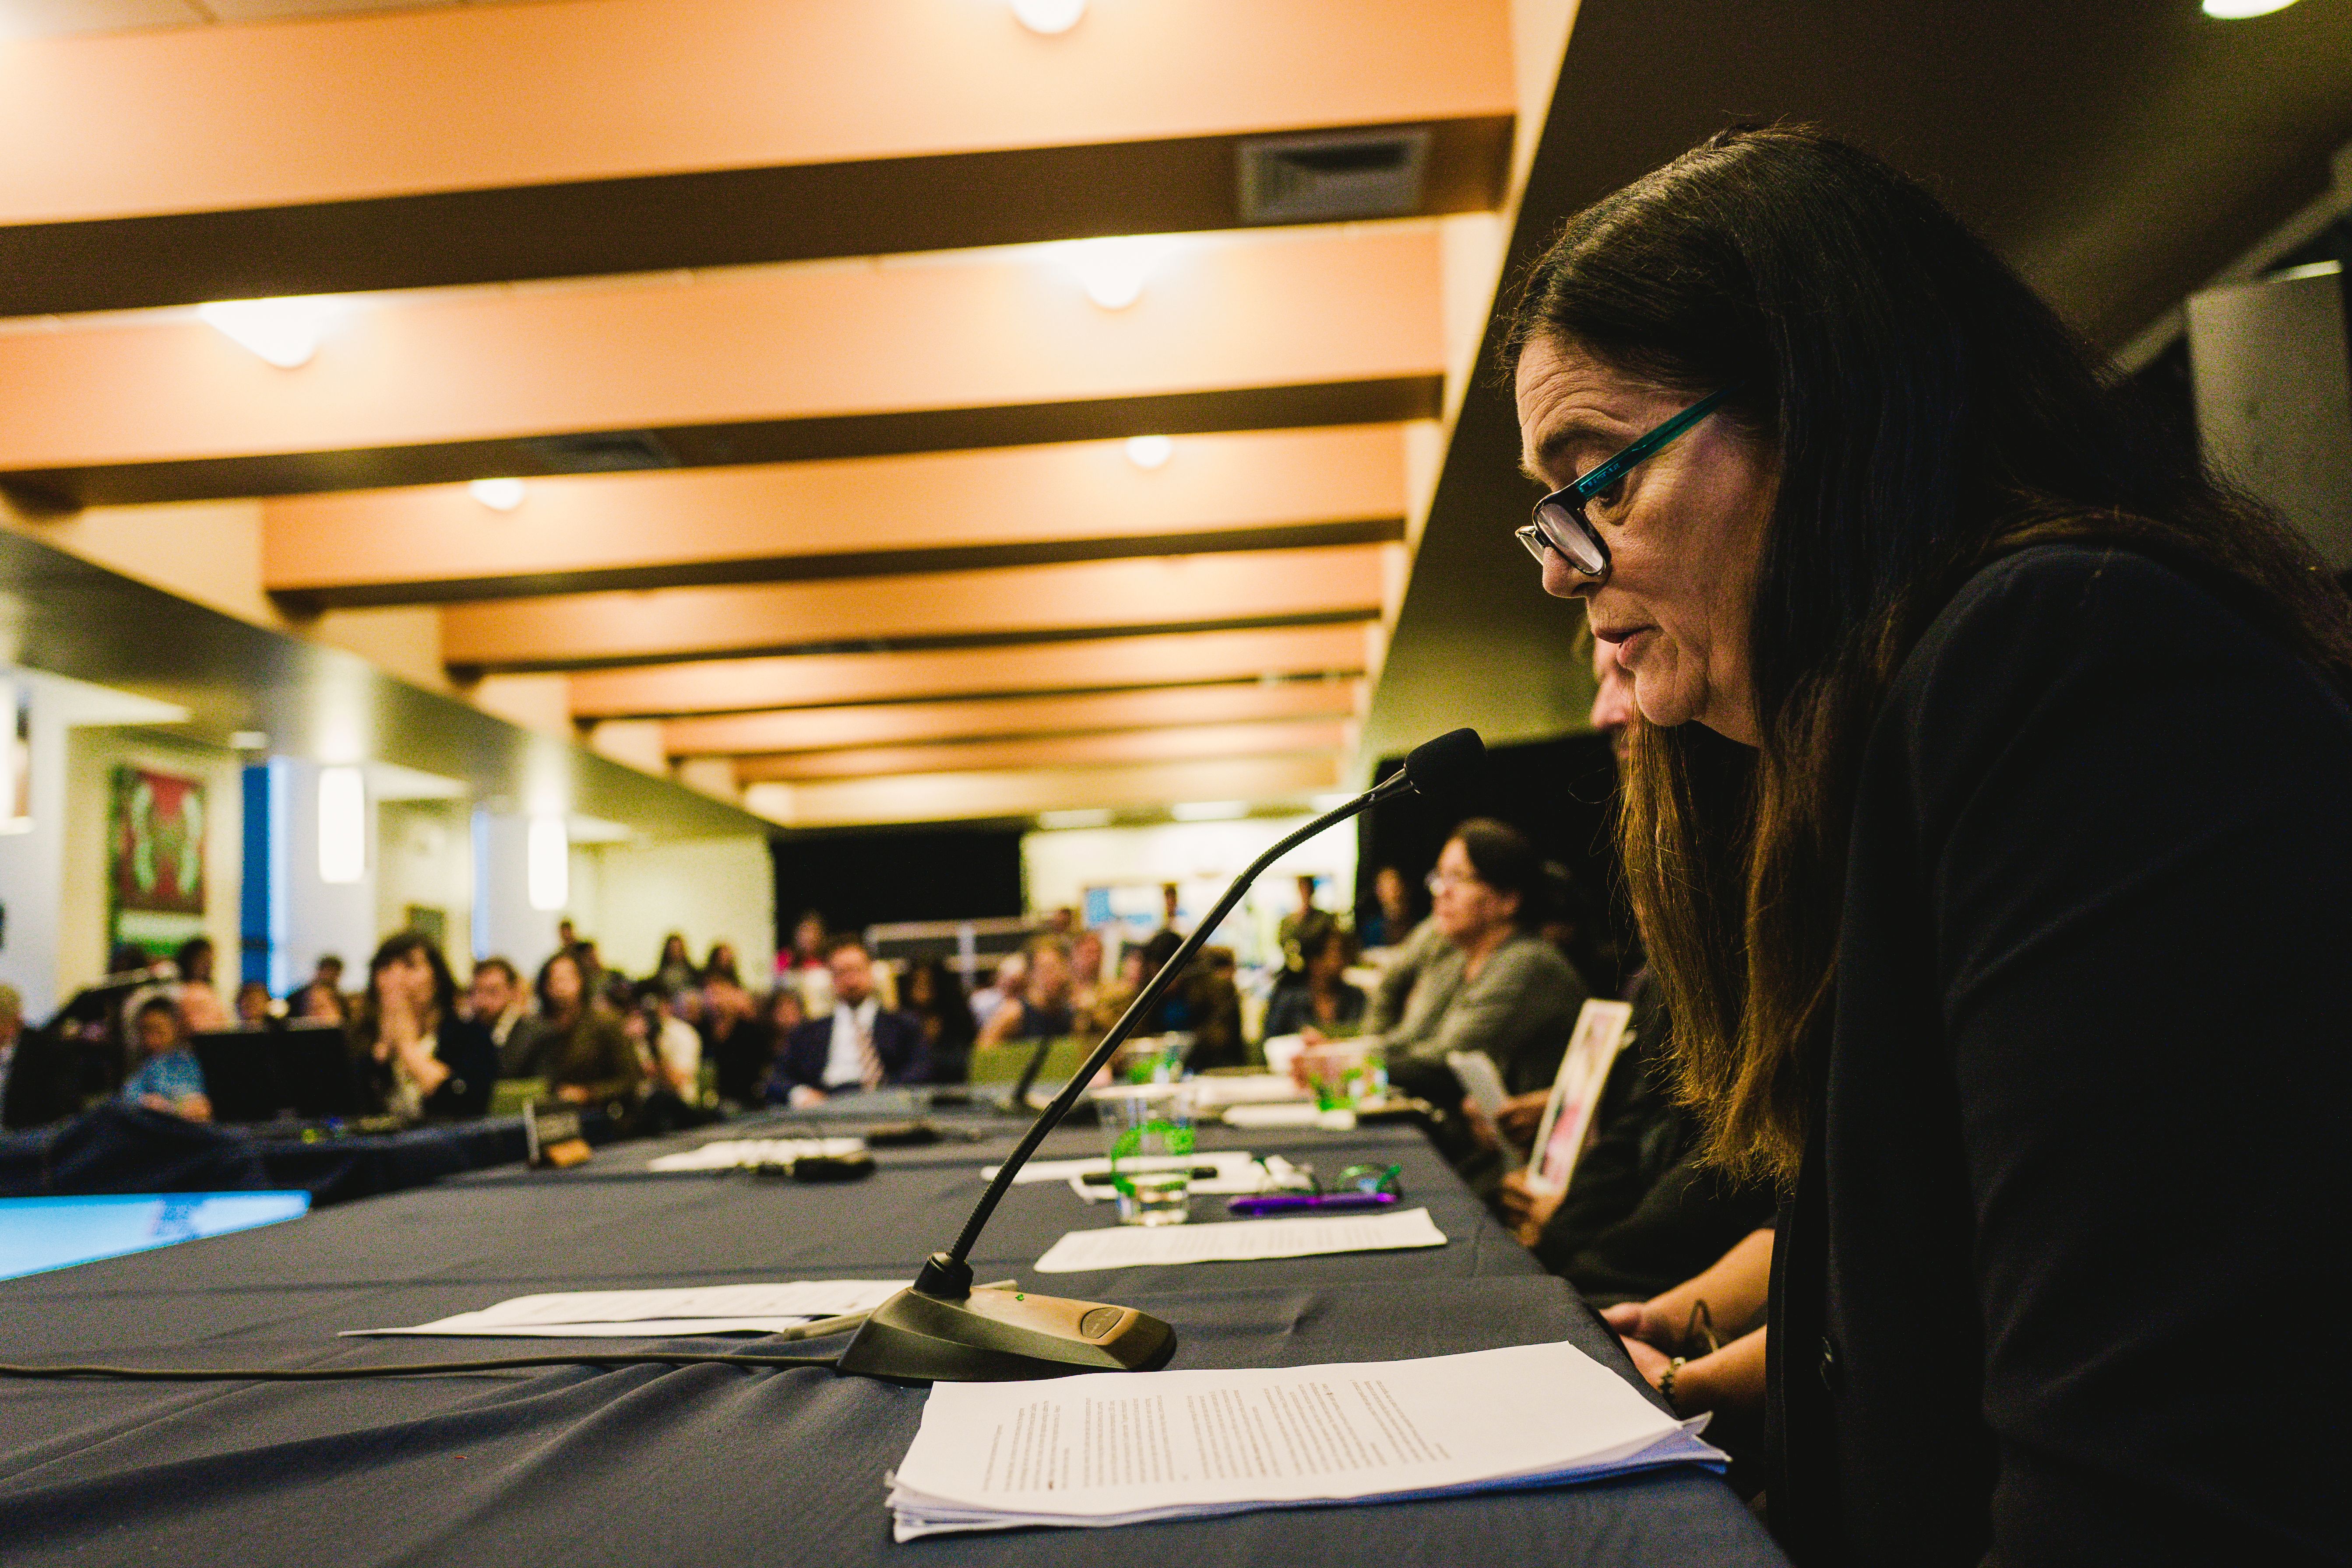 Mercedes Doretti, co-founder of the Argentine Forensic Group, speaks at the conference. Image courtesy of the Commission Inter-Americana de Derechos Humanos. United States, 2018.